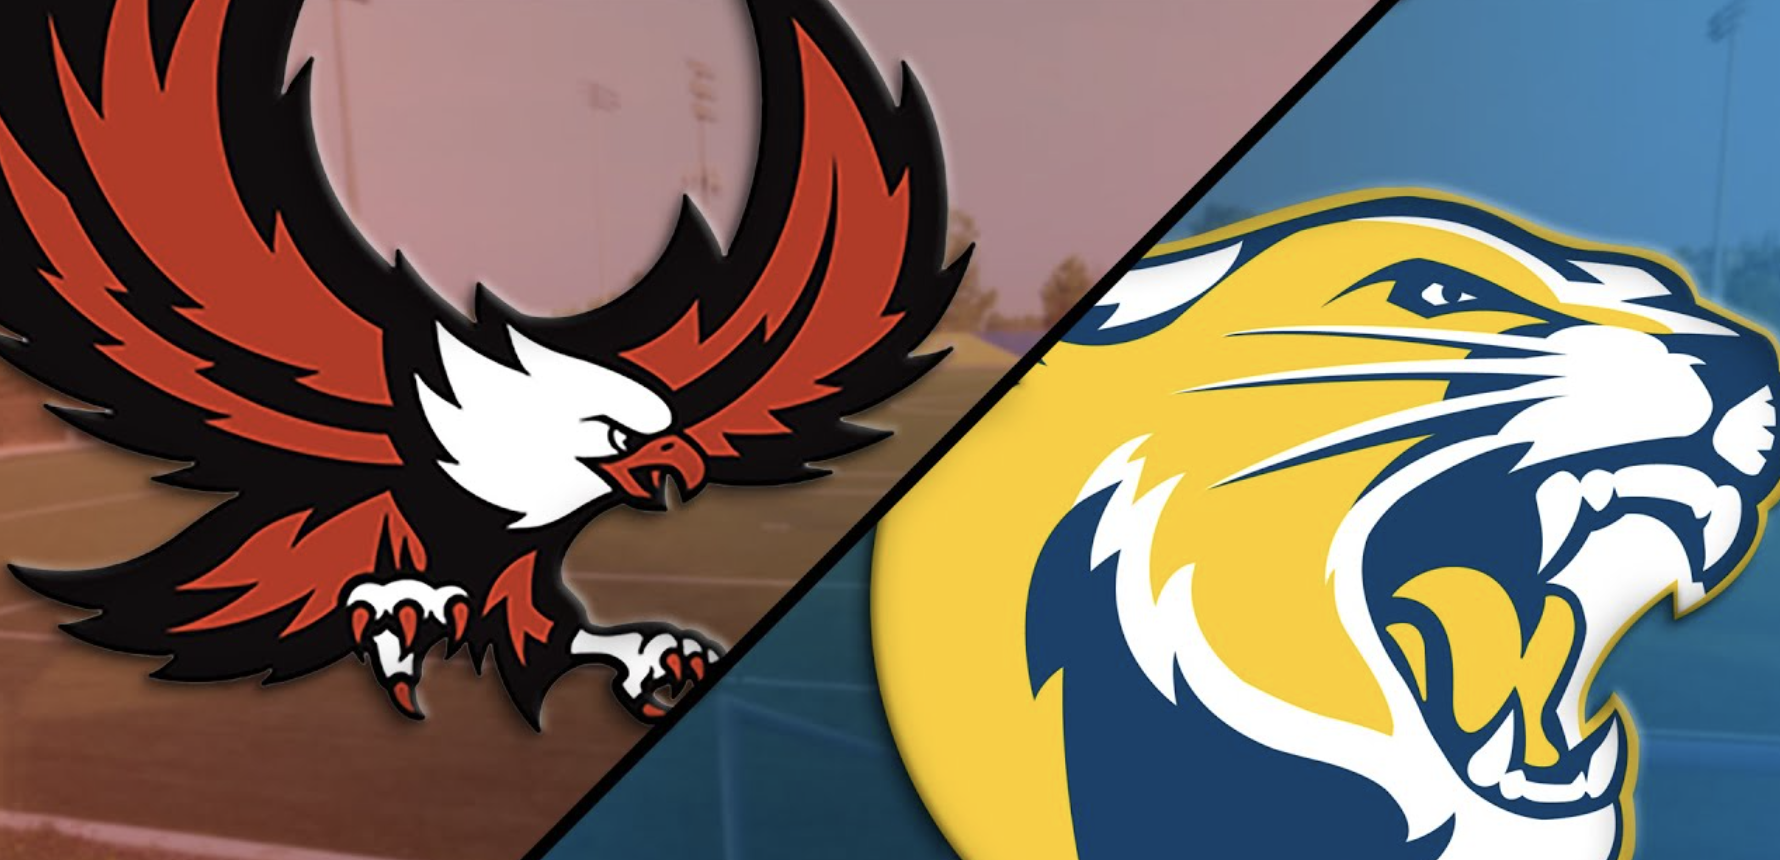 College of the Canyons vs. Mt. San Jacinto College promotional logo graphic.